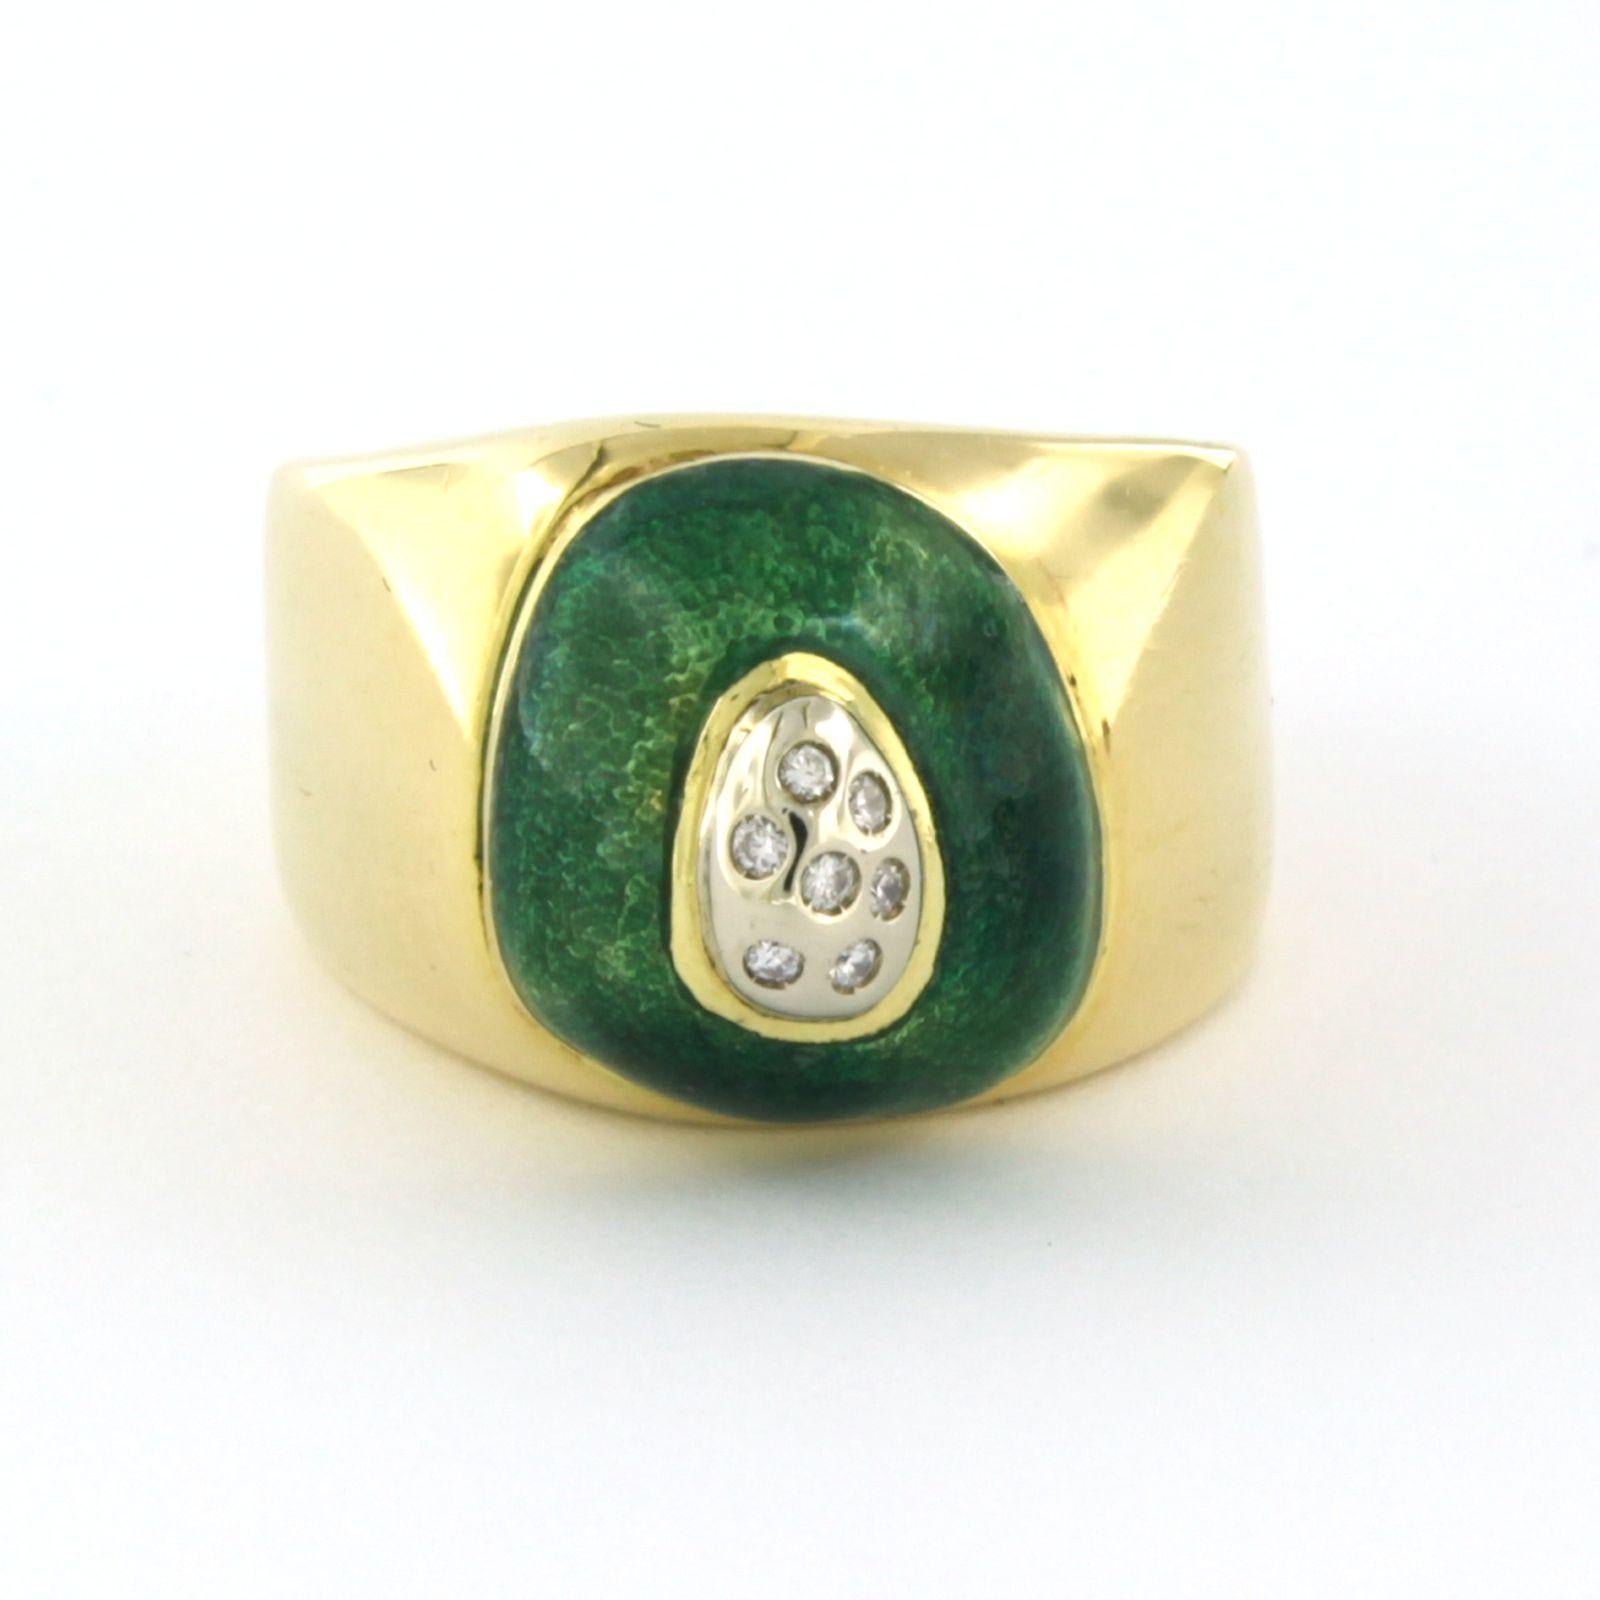 18k bicolor gold ring decorated with green enamel and set with brilliant cut diamonds. 0.05ct - F/G - VS/SI - ring size U.S. 6.5(17/53)

detailed description:

The top of the ring is 1.4 cm wide by 1.0 cm high

Weight 12.0 grams

ring size US 6.5 -